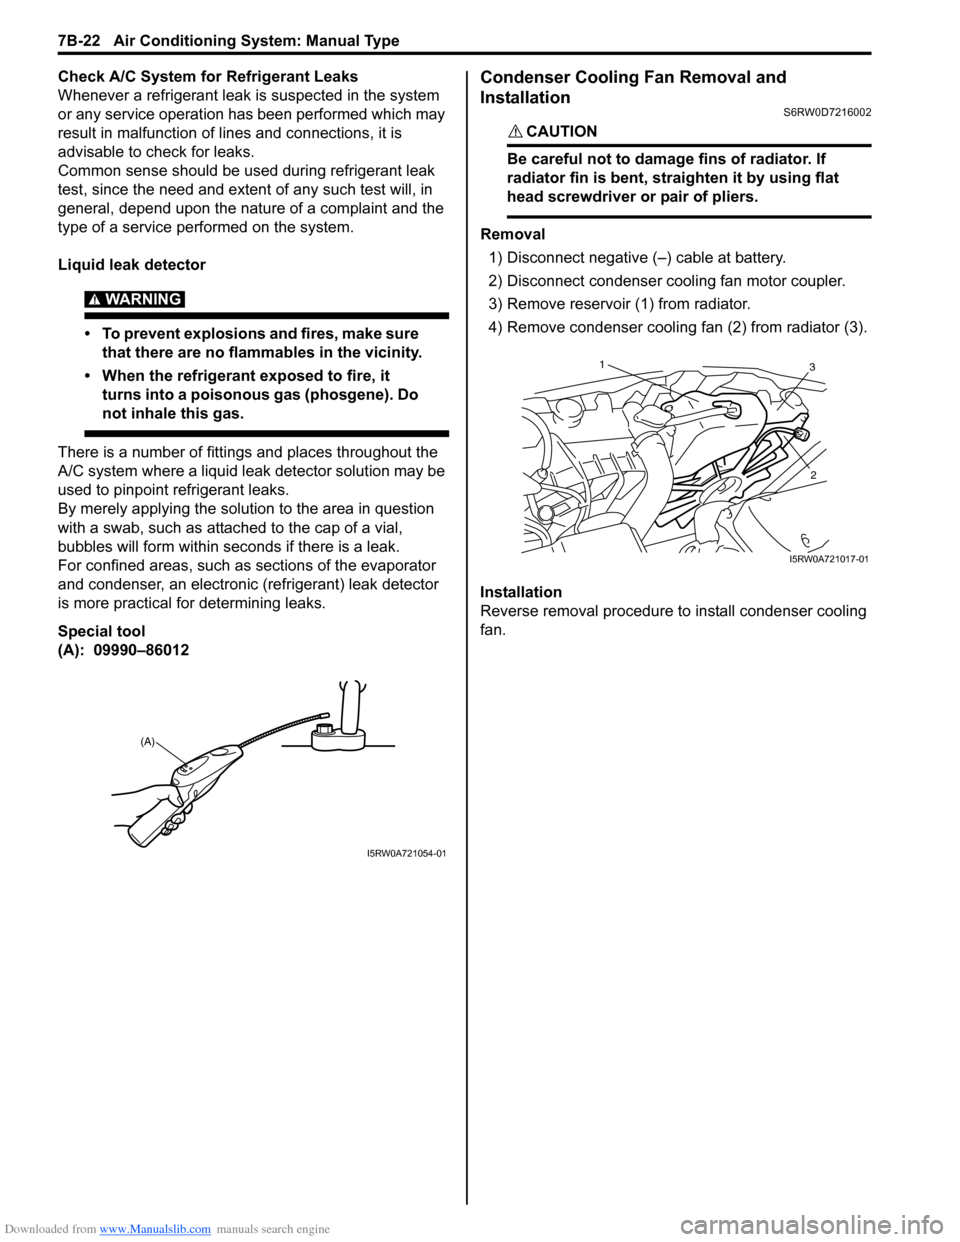 SUZUKI SX4 2006 1.G Service Workshop Manual Downloaded from www.Manualslib.com manuals search engine 7B-22 Air Conditioning System: Manual Type
Check A/C System for Refrigerant Leaks
Whenever a refrigerant leak is suspected in the system 
or an